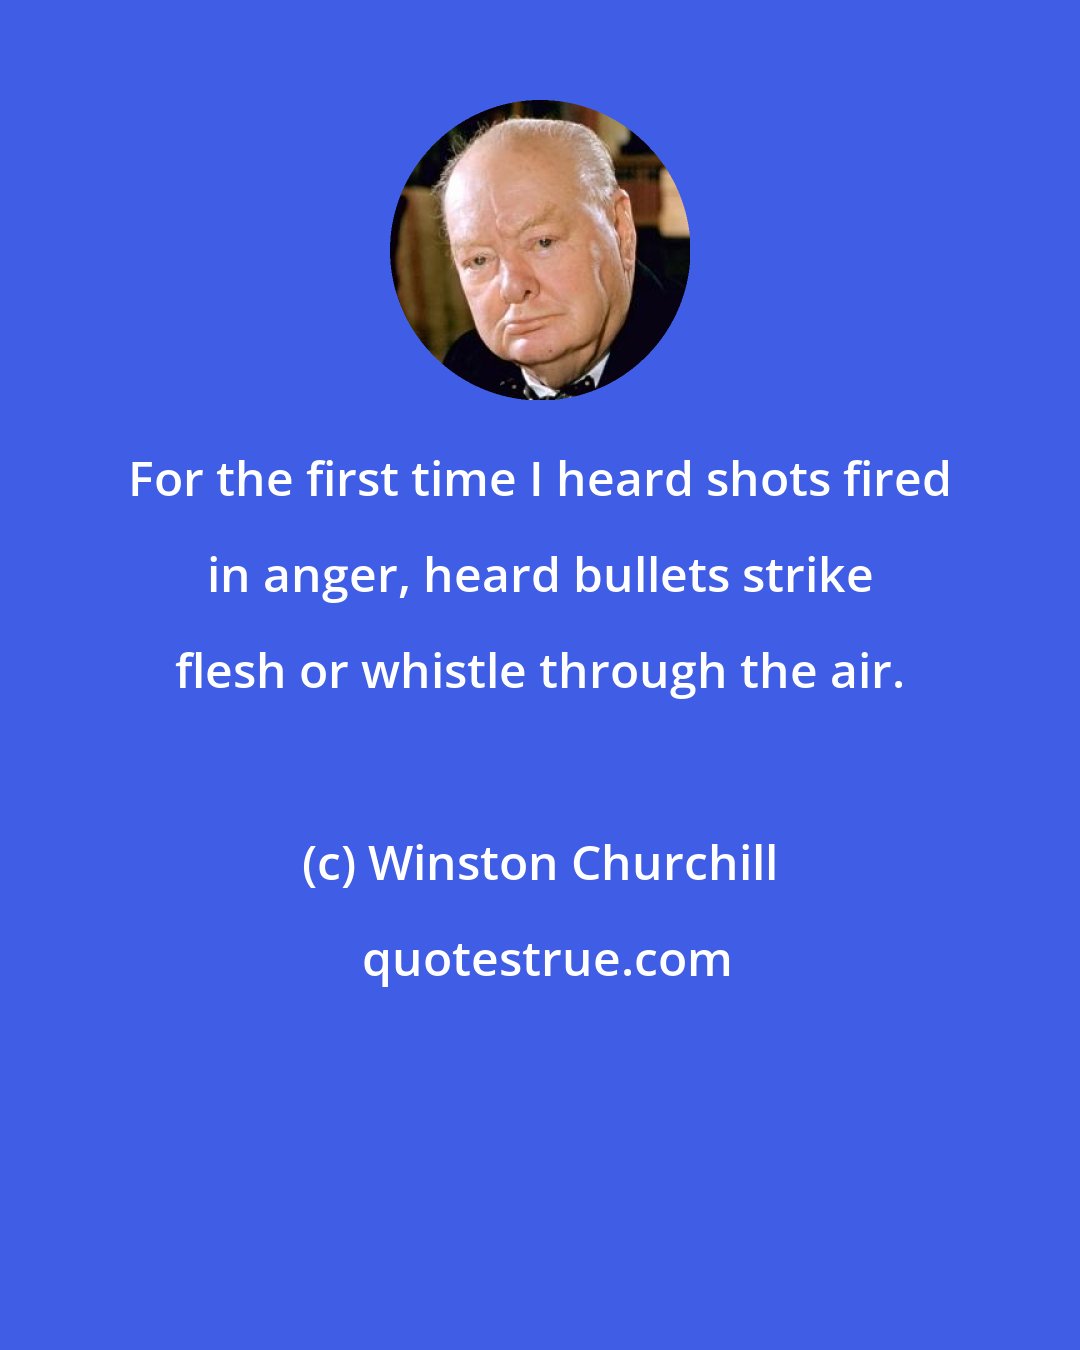 Winston Churchill: For the first time I heard shots fired in anger, heard bullets strike flesh or whistle through the air.